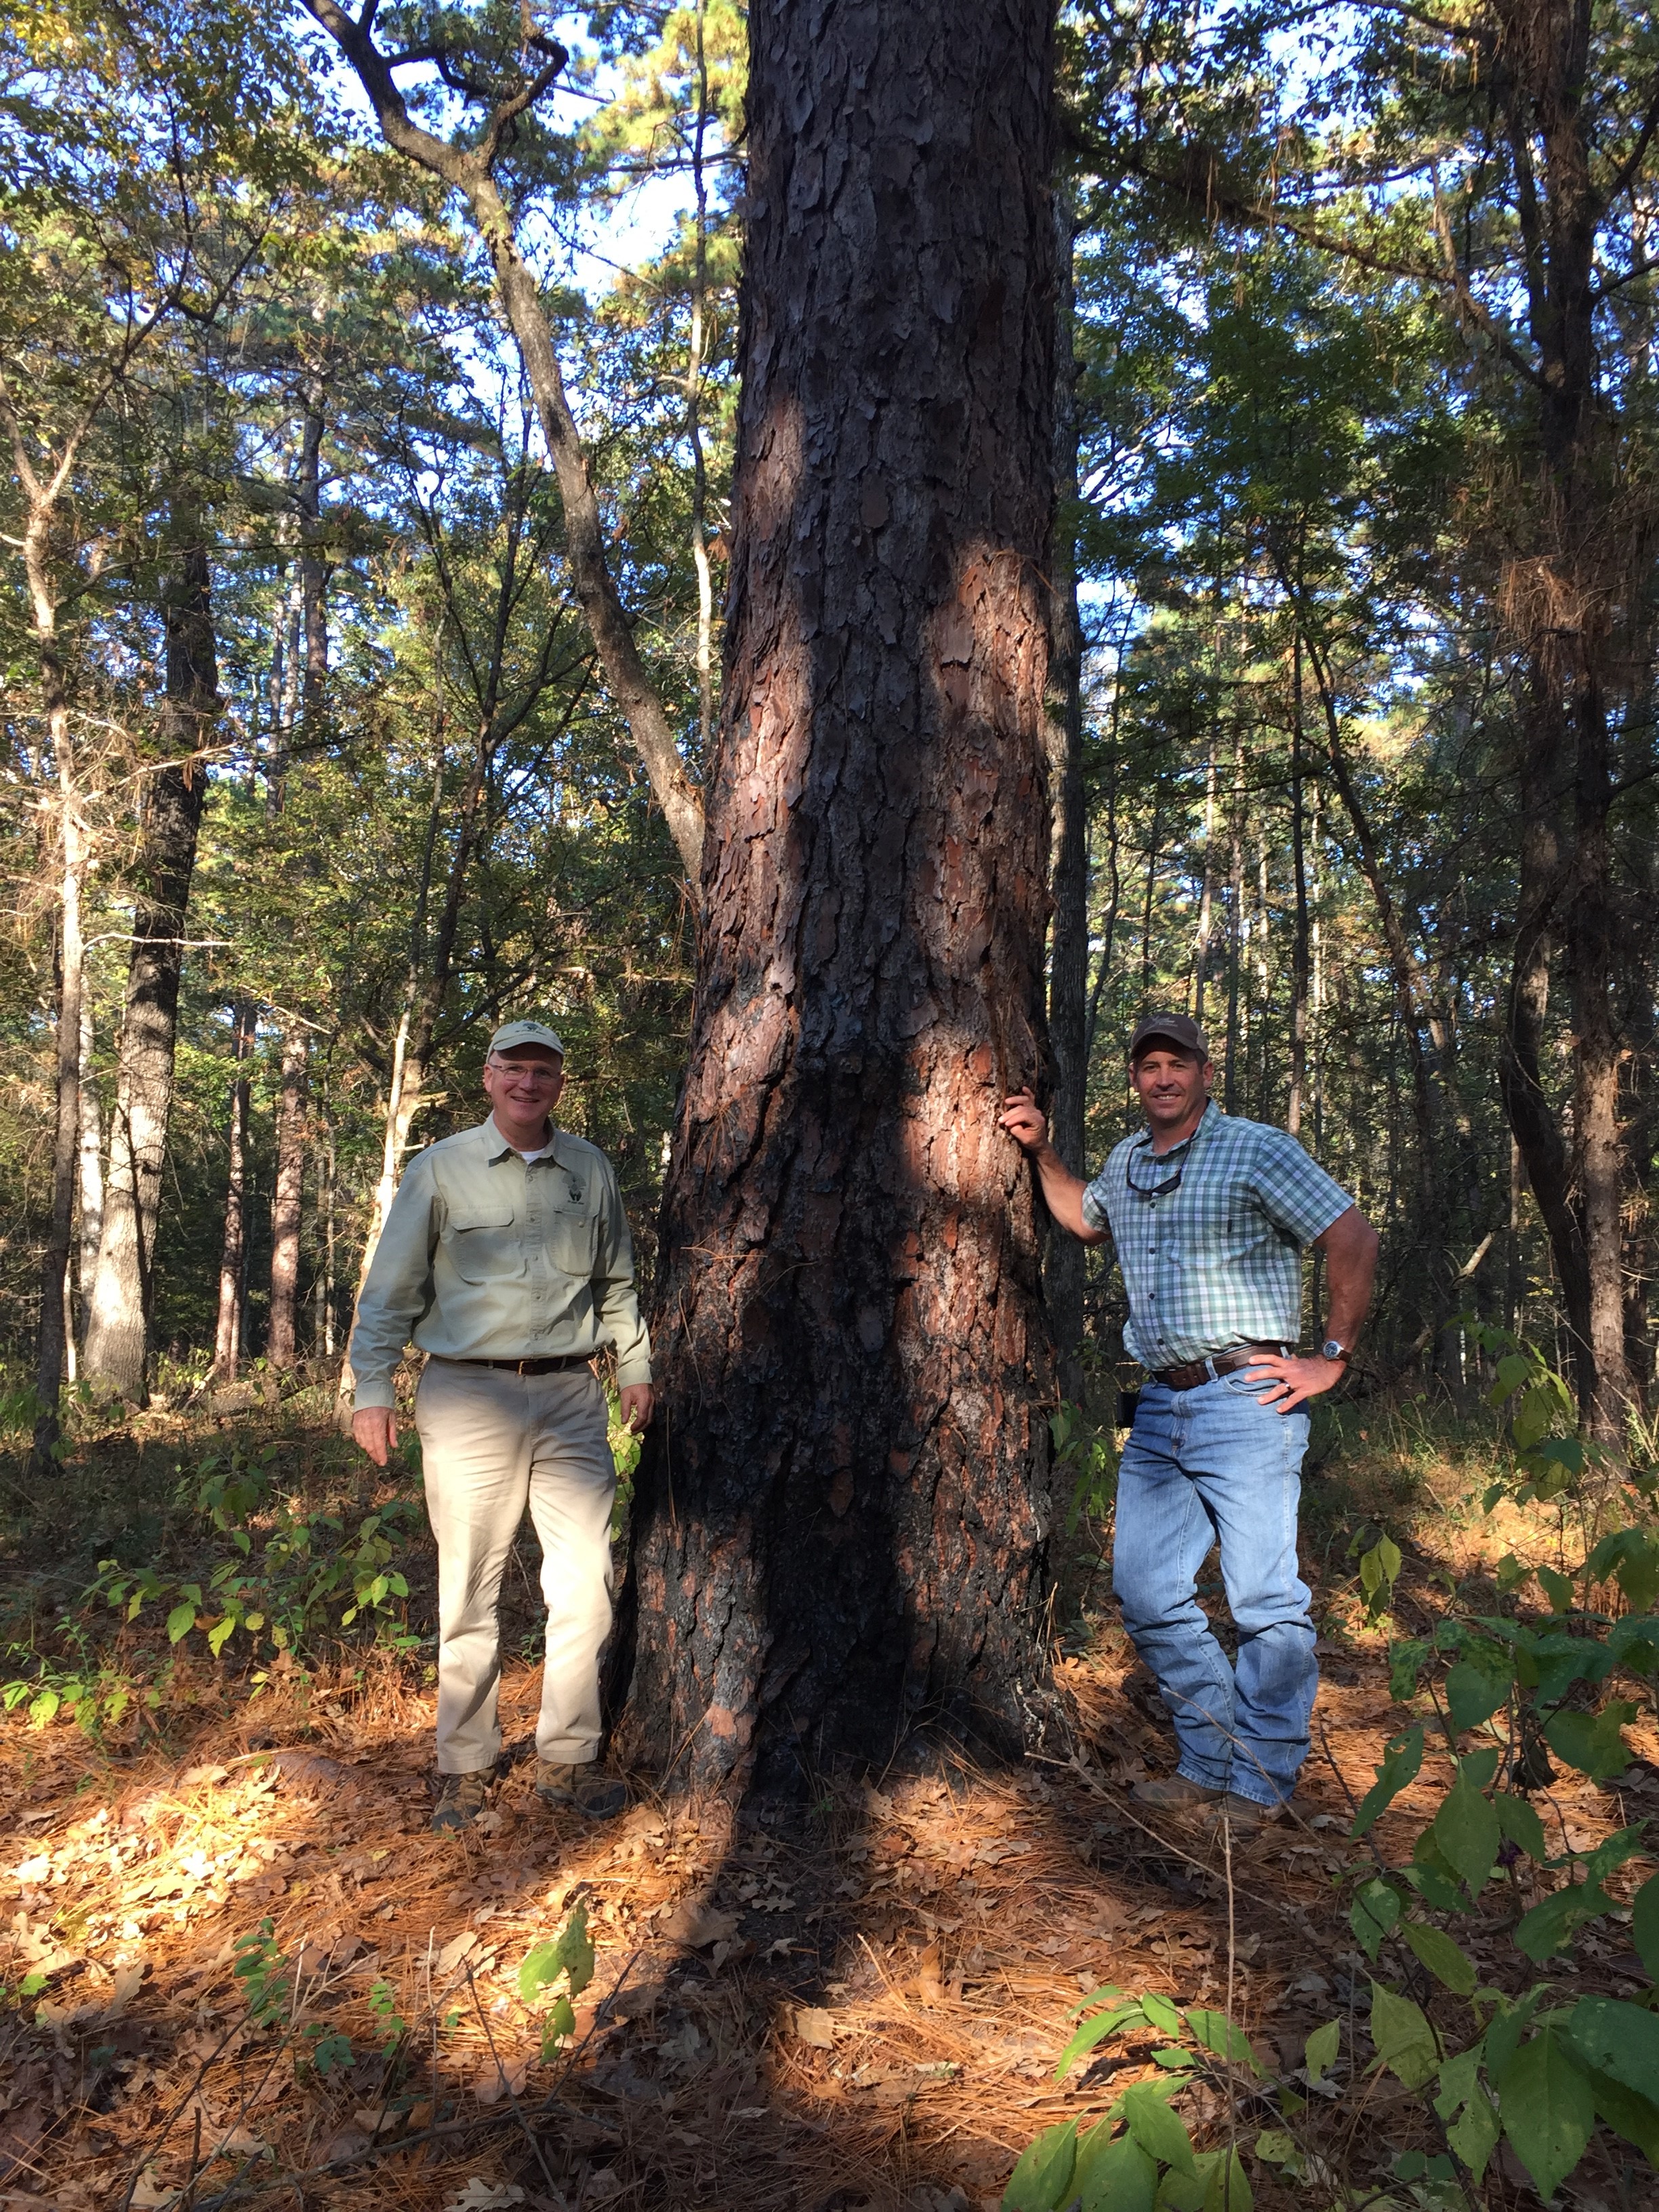 Robert Abernethy, Longleaf Alliance, and Robert Sanders, Boggy Slough Manager, standing next to the recently recognized Texas Champion Longleaf Pine Tree. Photo credit: Kent Evans